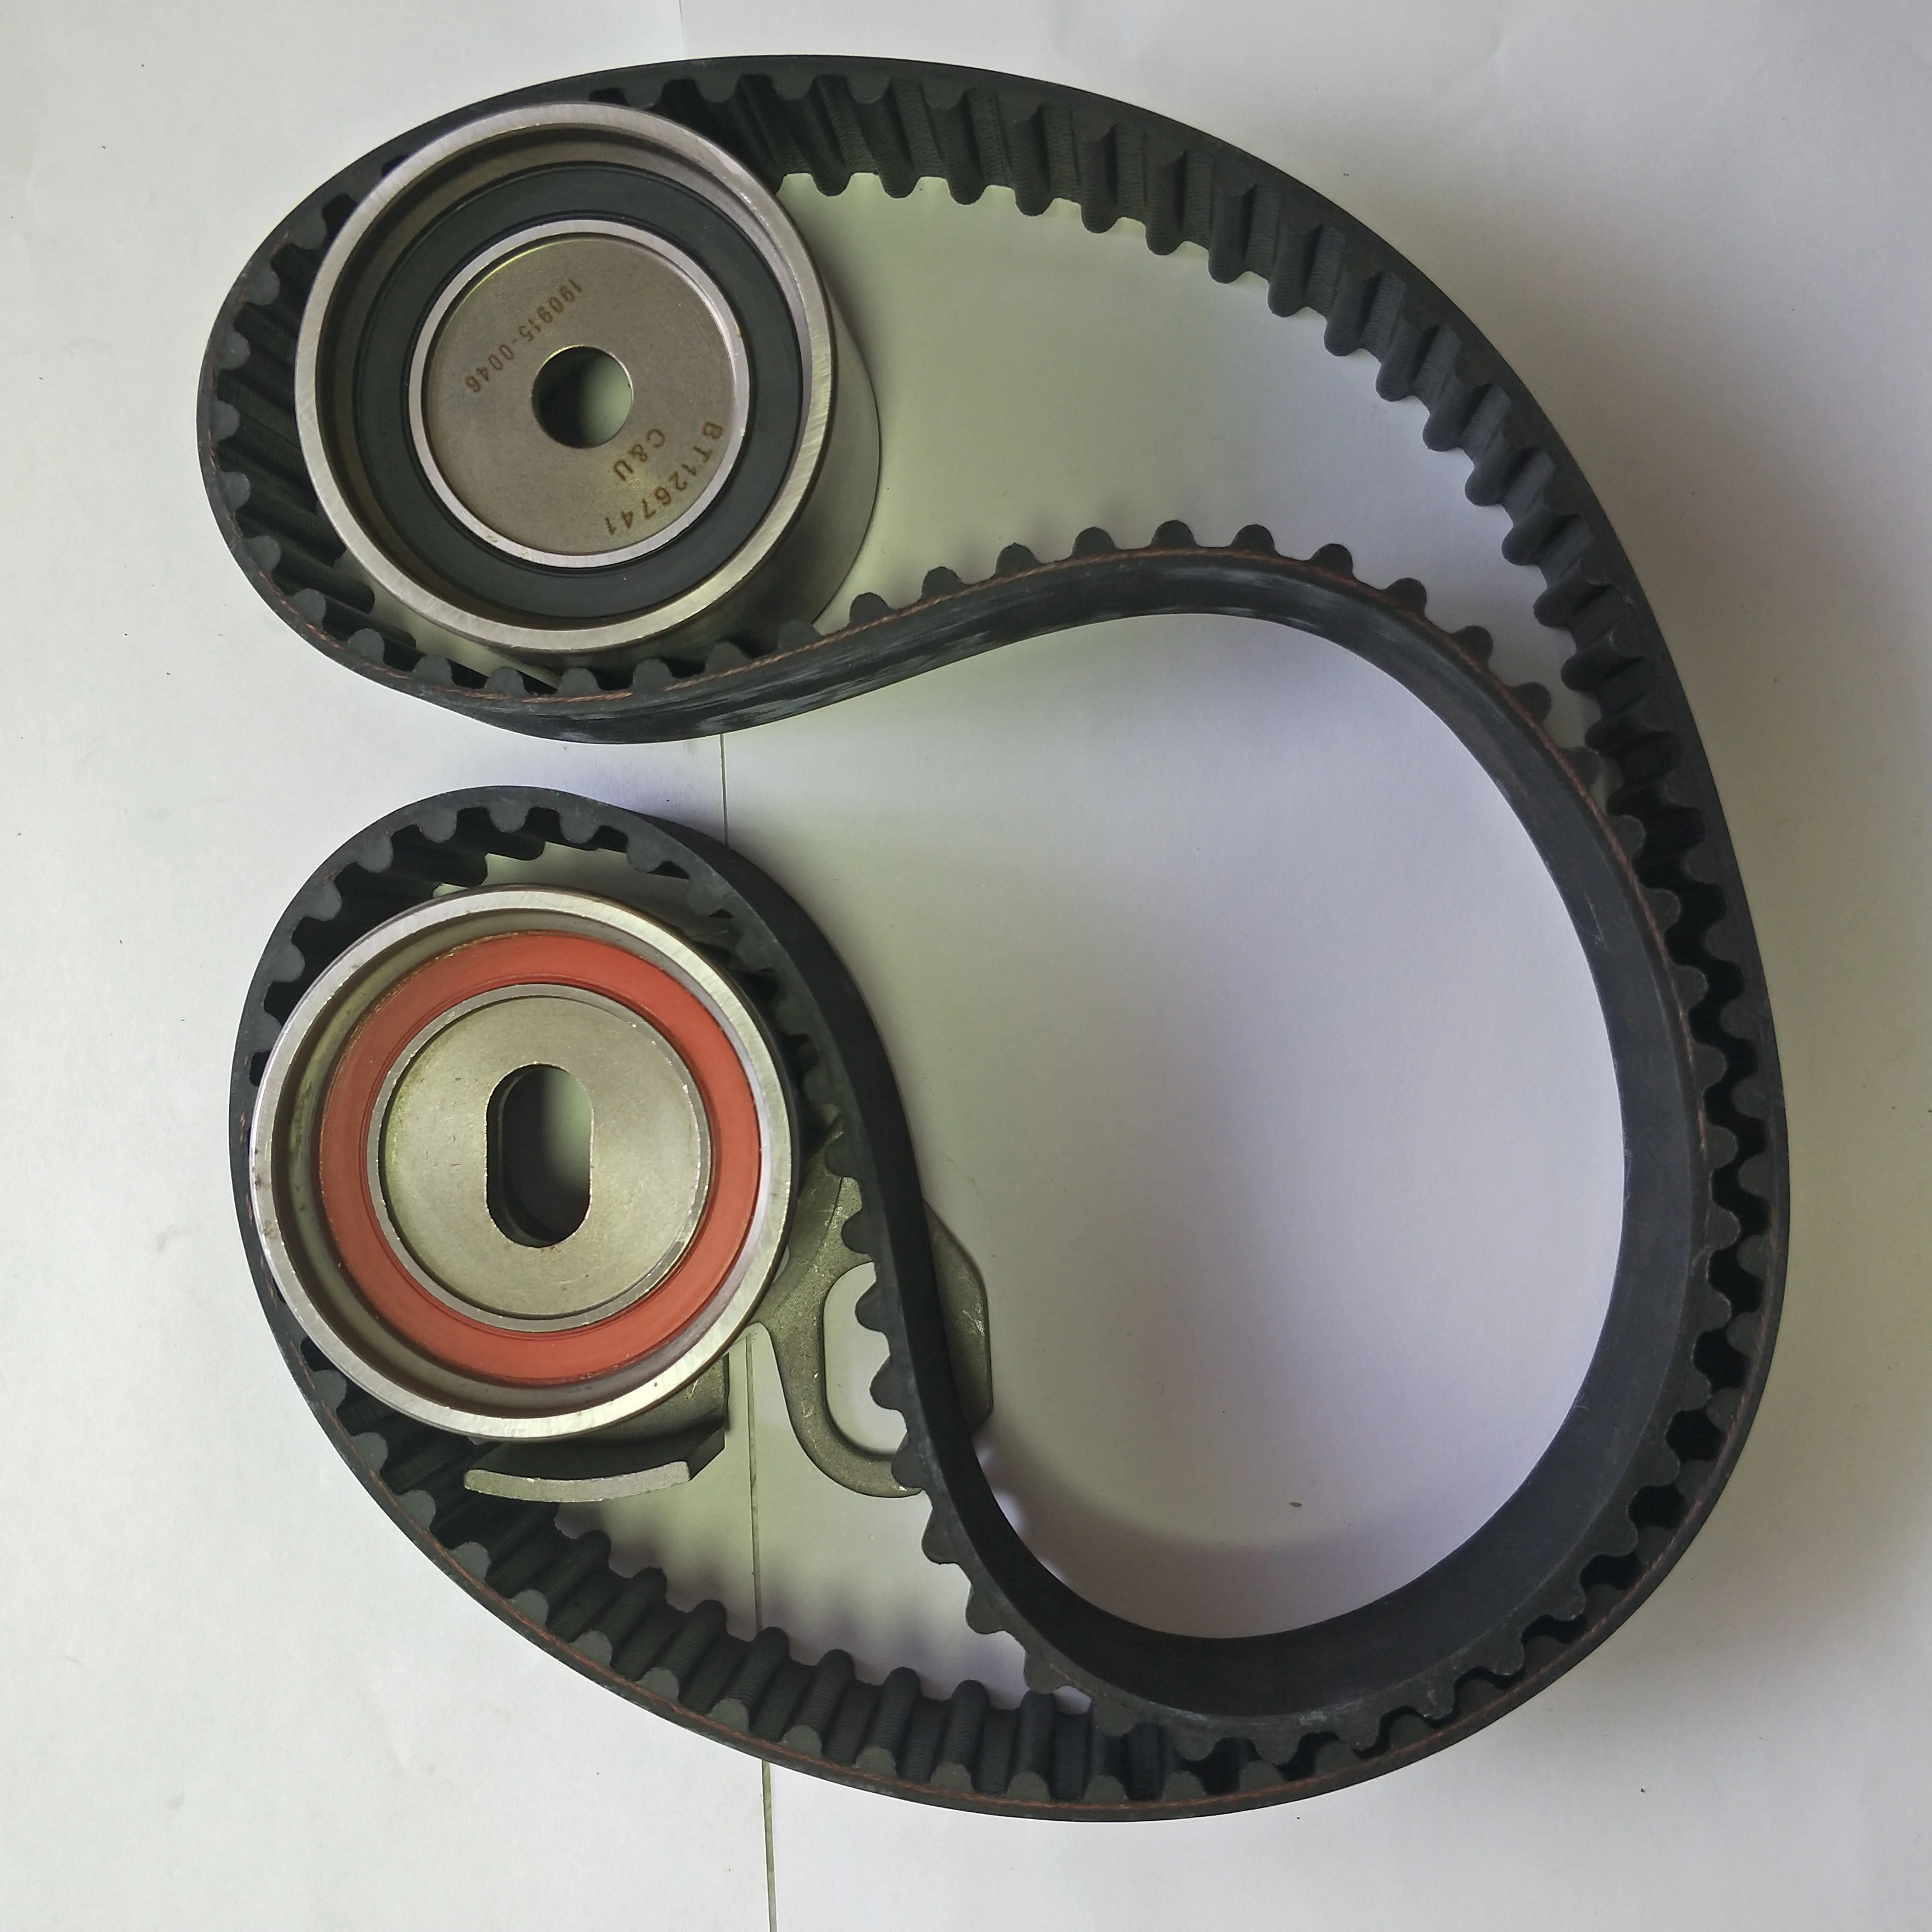 

WEILL 1002250-E06 1006060-E06 1002250-E06 GREAT WALL HOVER CUV H3 H5 WINGLE 2.5TCI 2.8TC TIMING BEARINGS TIMING BELT(3 PIECES SA